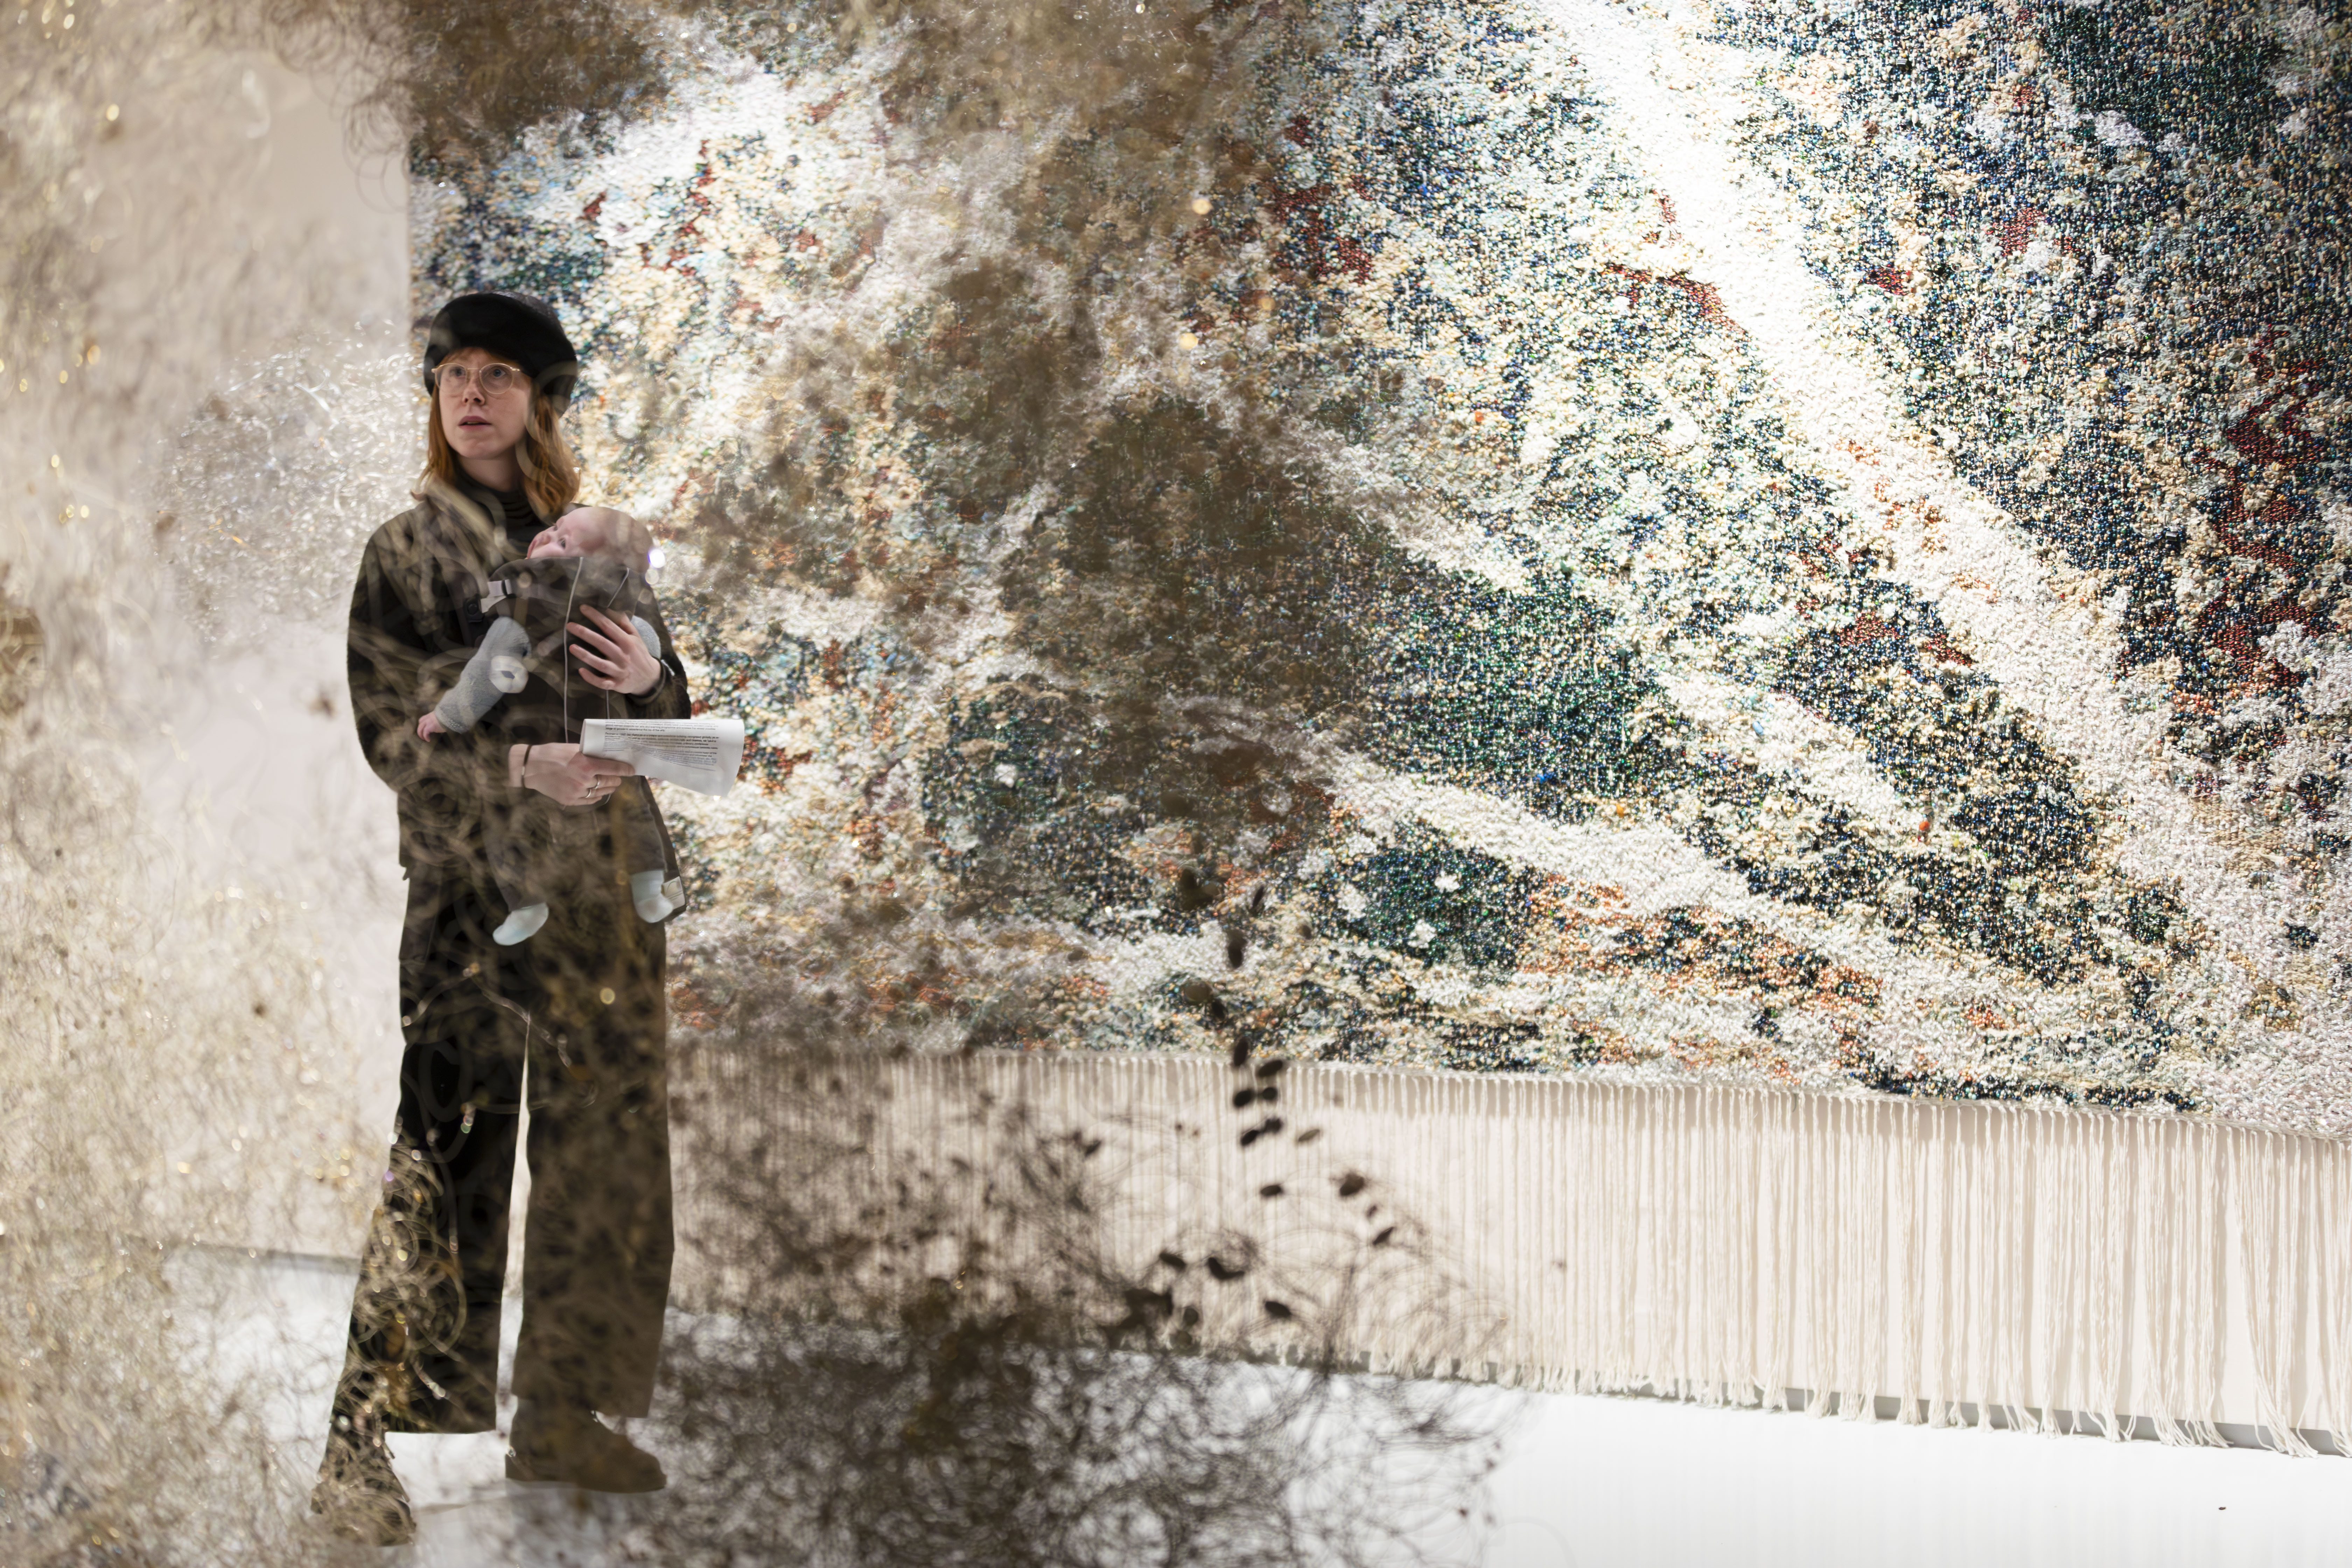 Unravel Exhibition at the Barbican - 